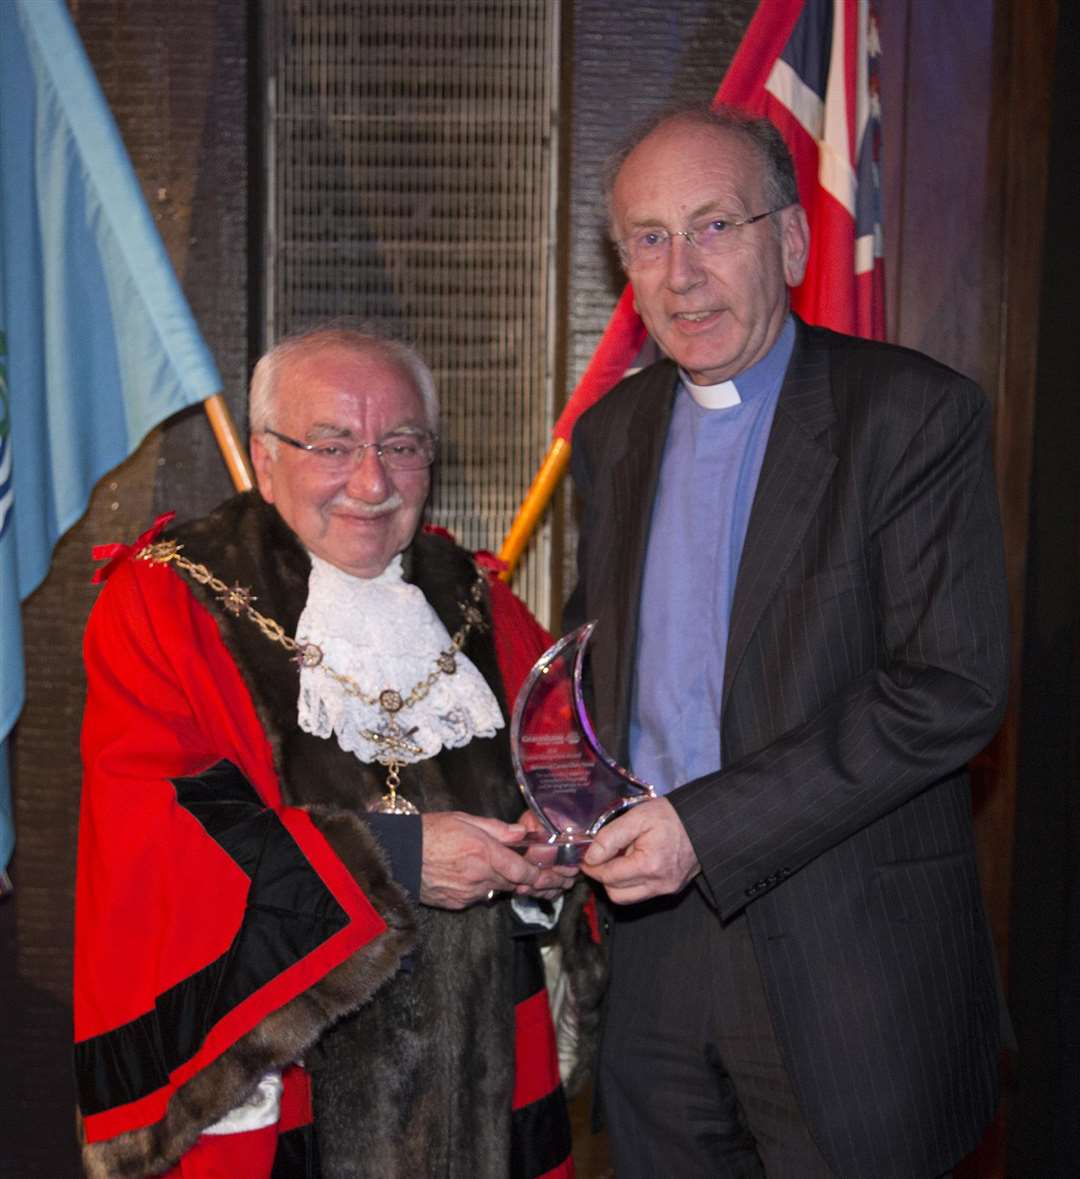 Chris Stone was presented with an award by former mayor Harold Craske. (2101926)